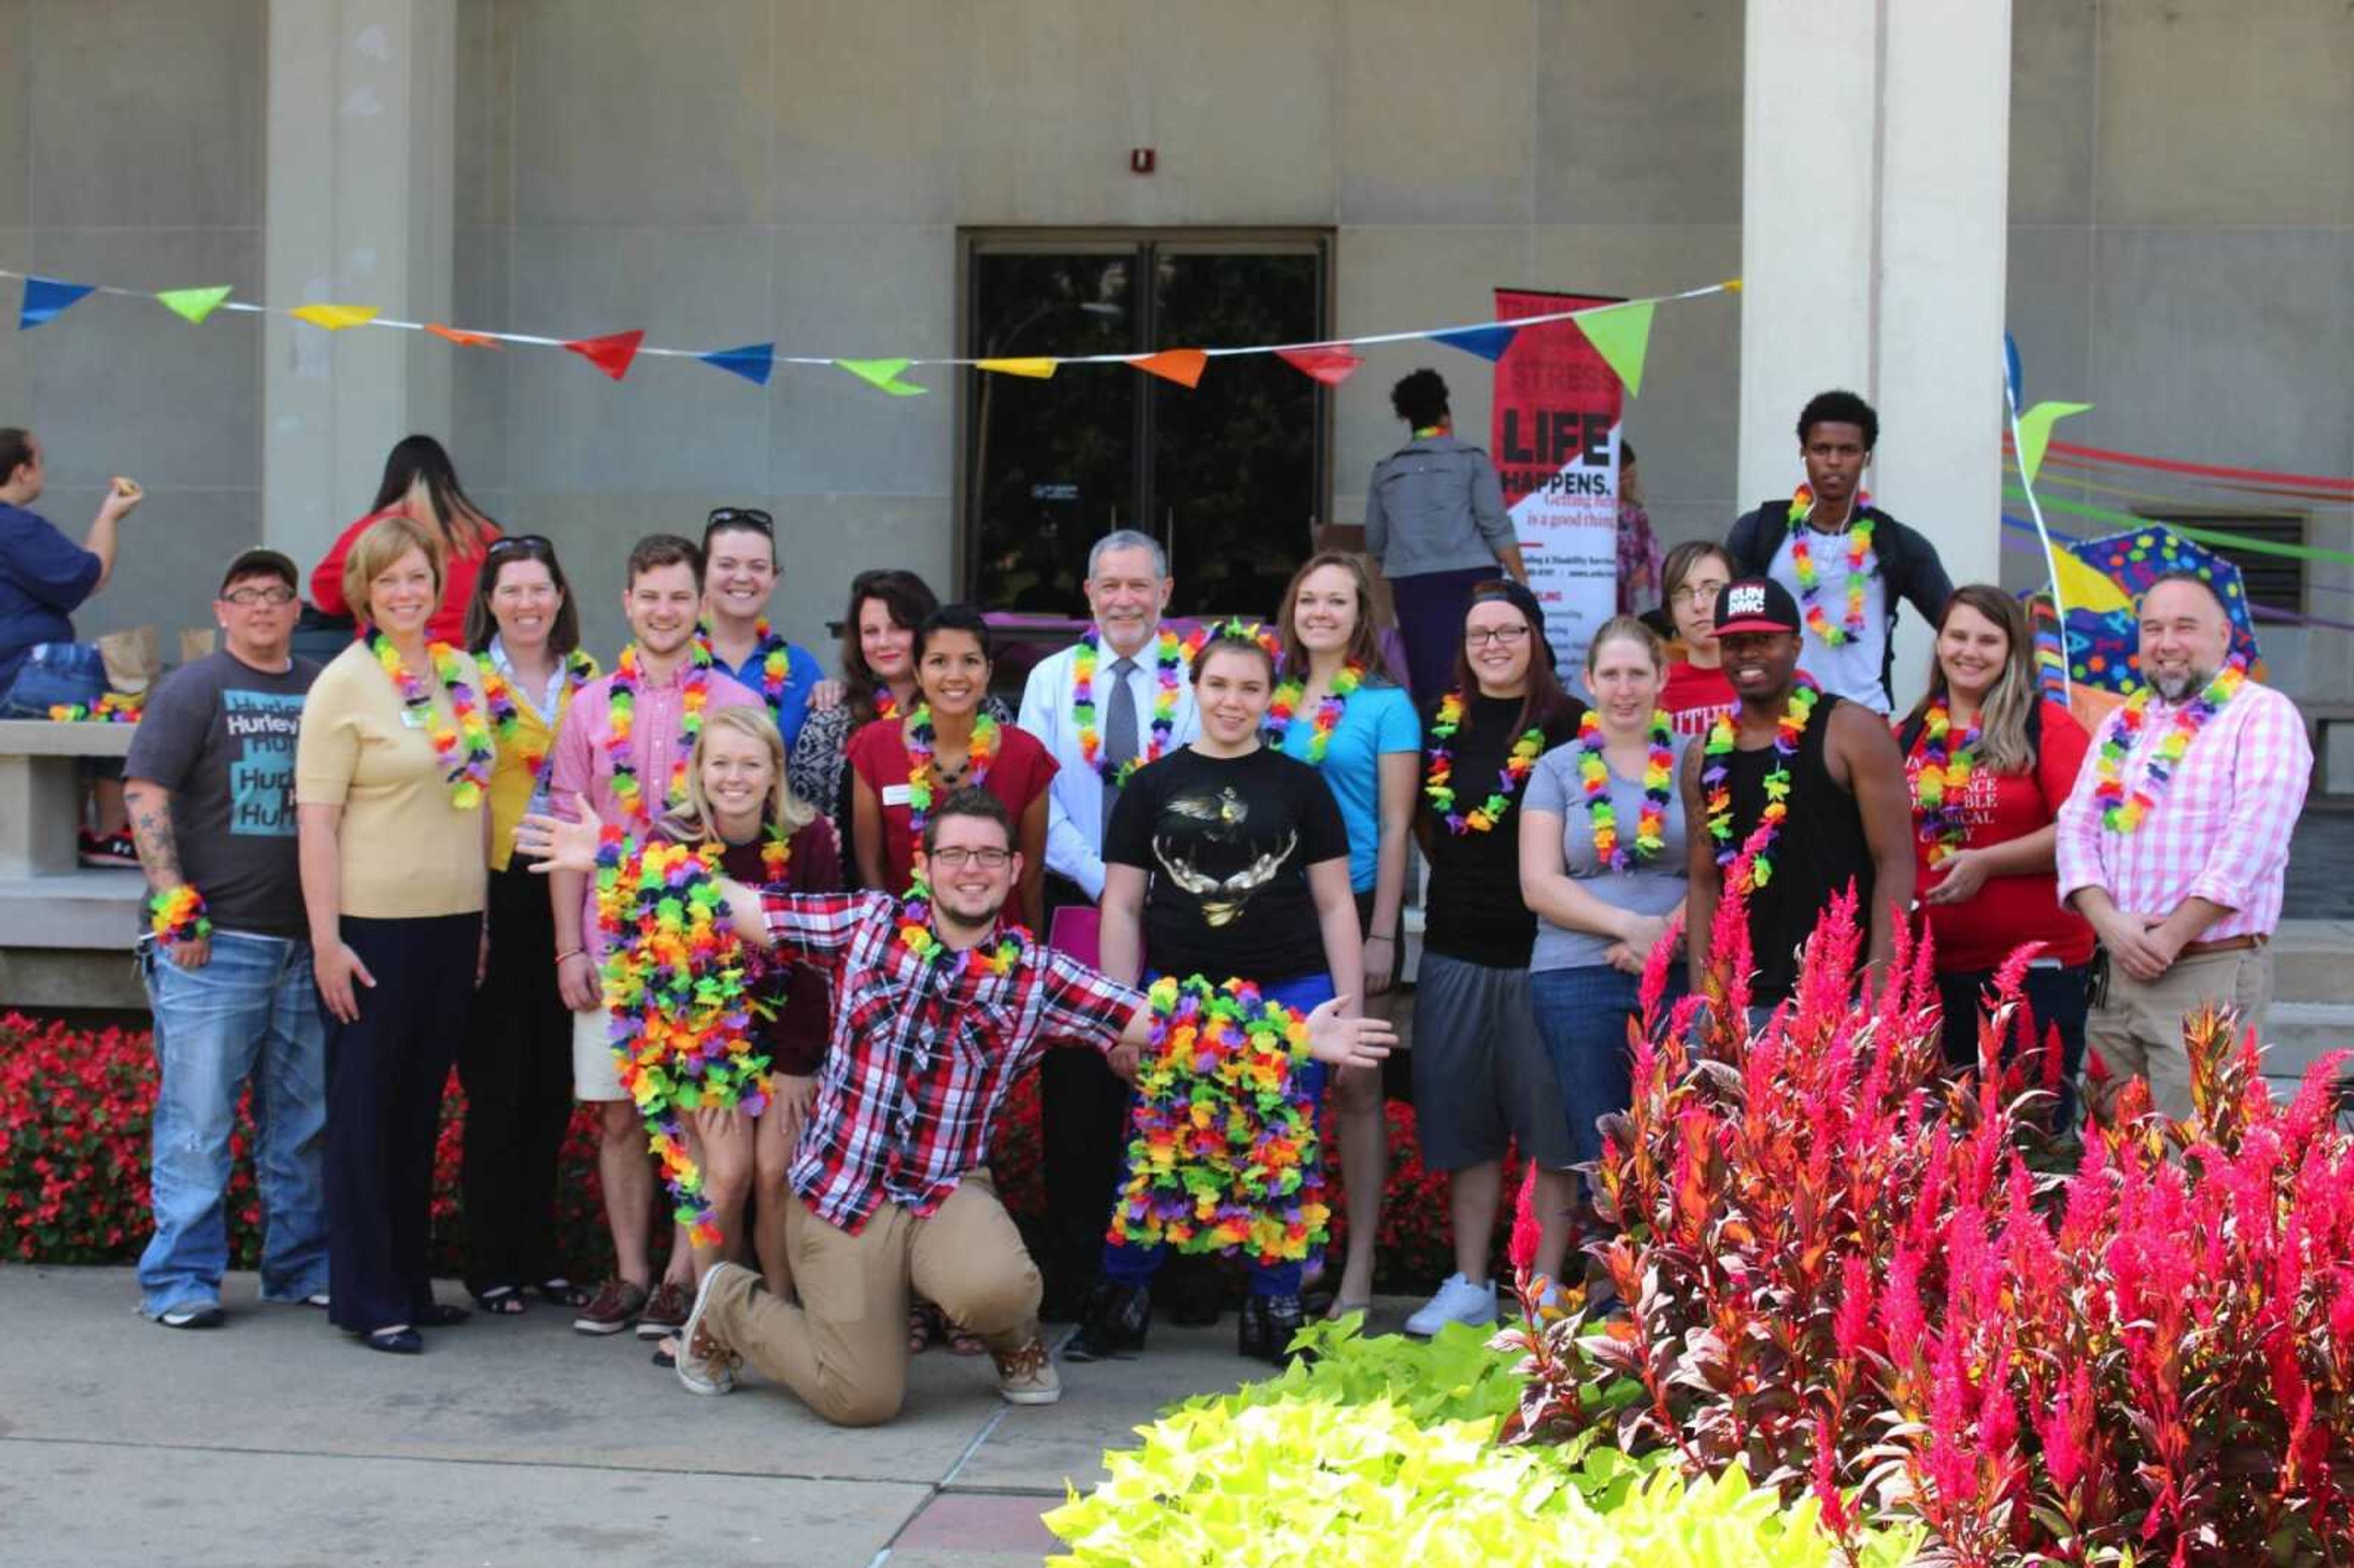 Dr. Debbie Below and University President Dr. Carlos Vargas posing with some students and staff at the LGBT barbecue on Aug. 27.